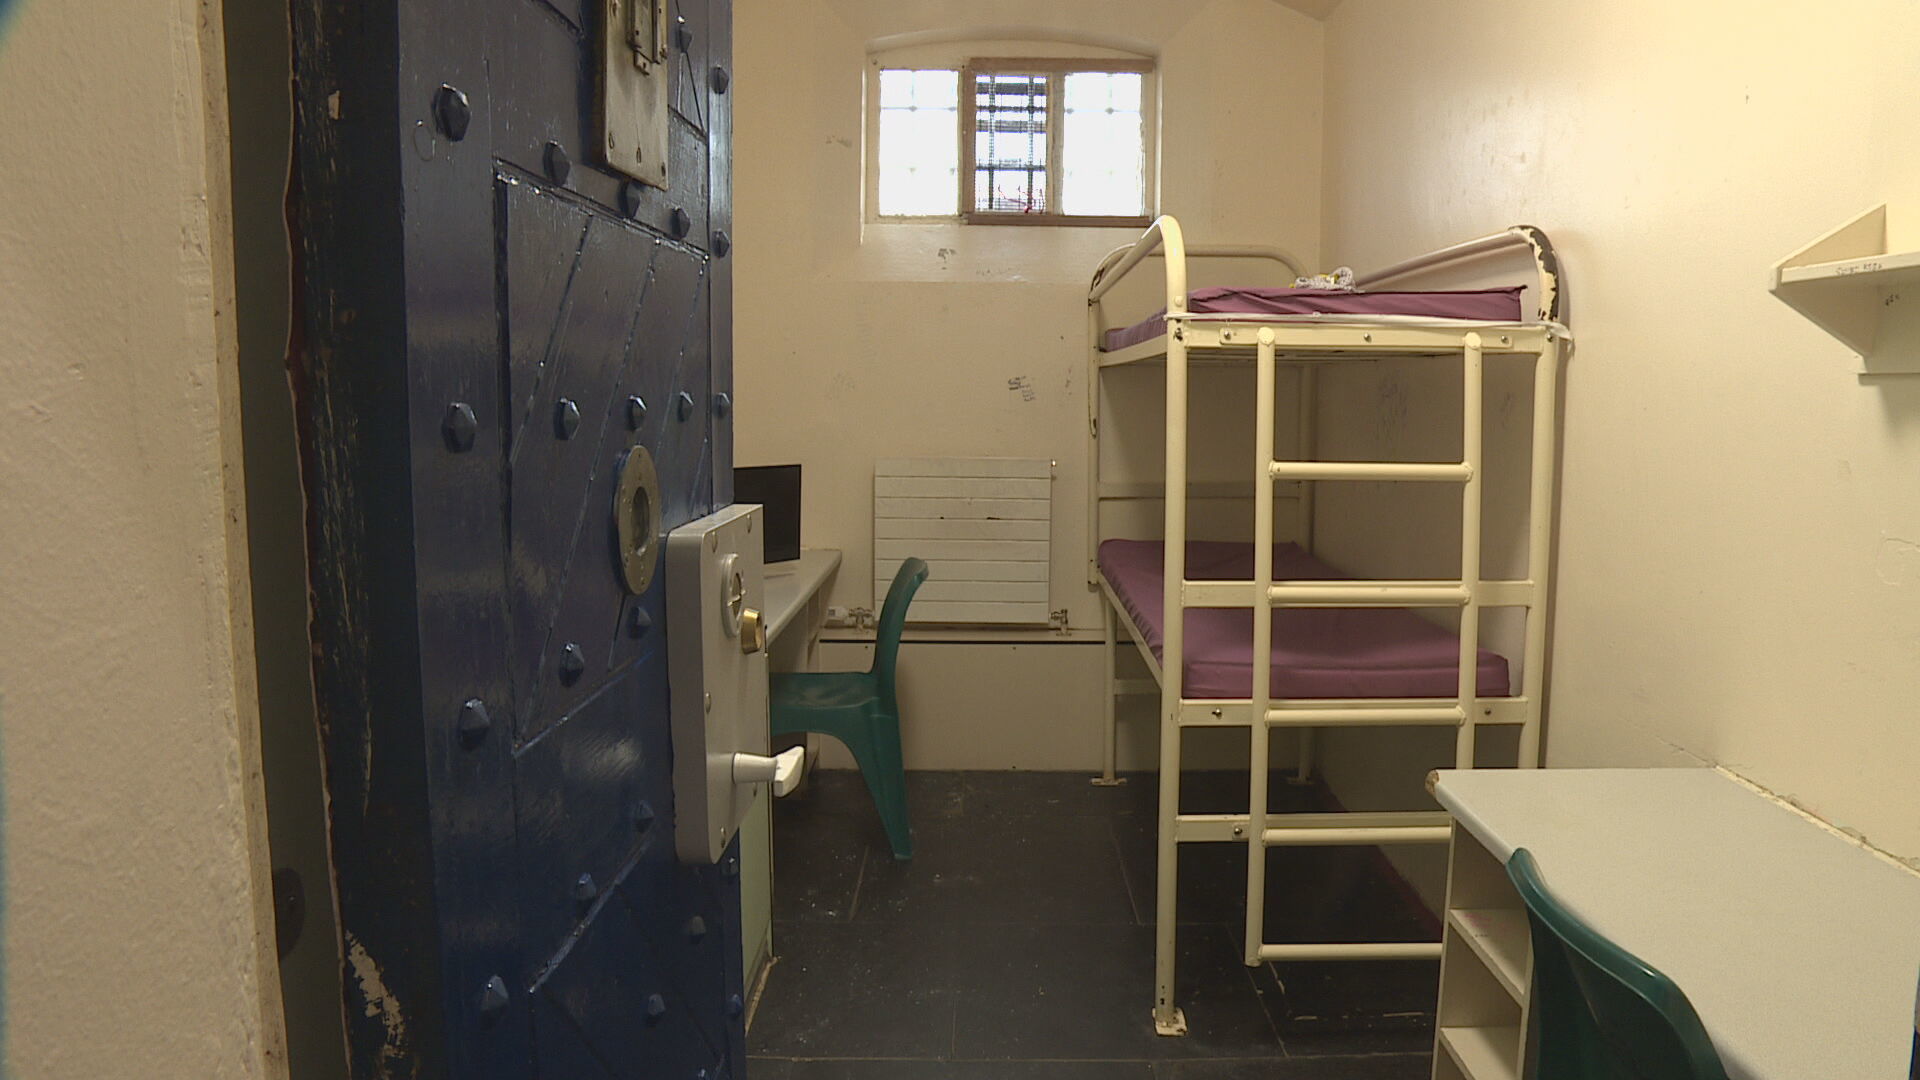 Barlinnie currently holds two people in cells designed for one 